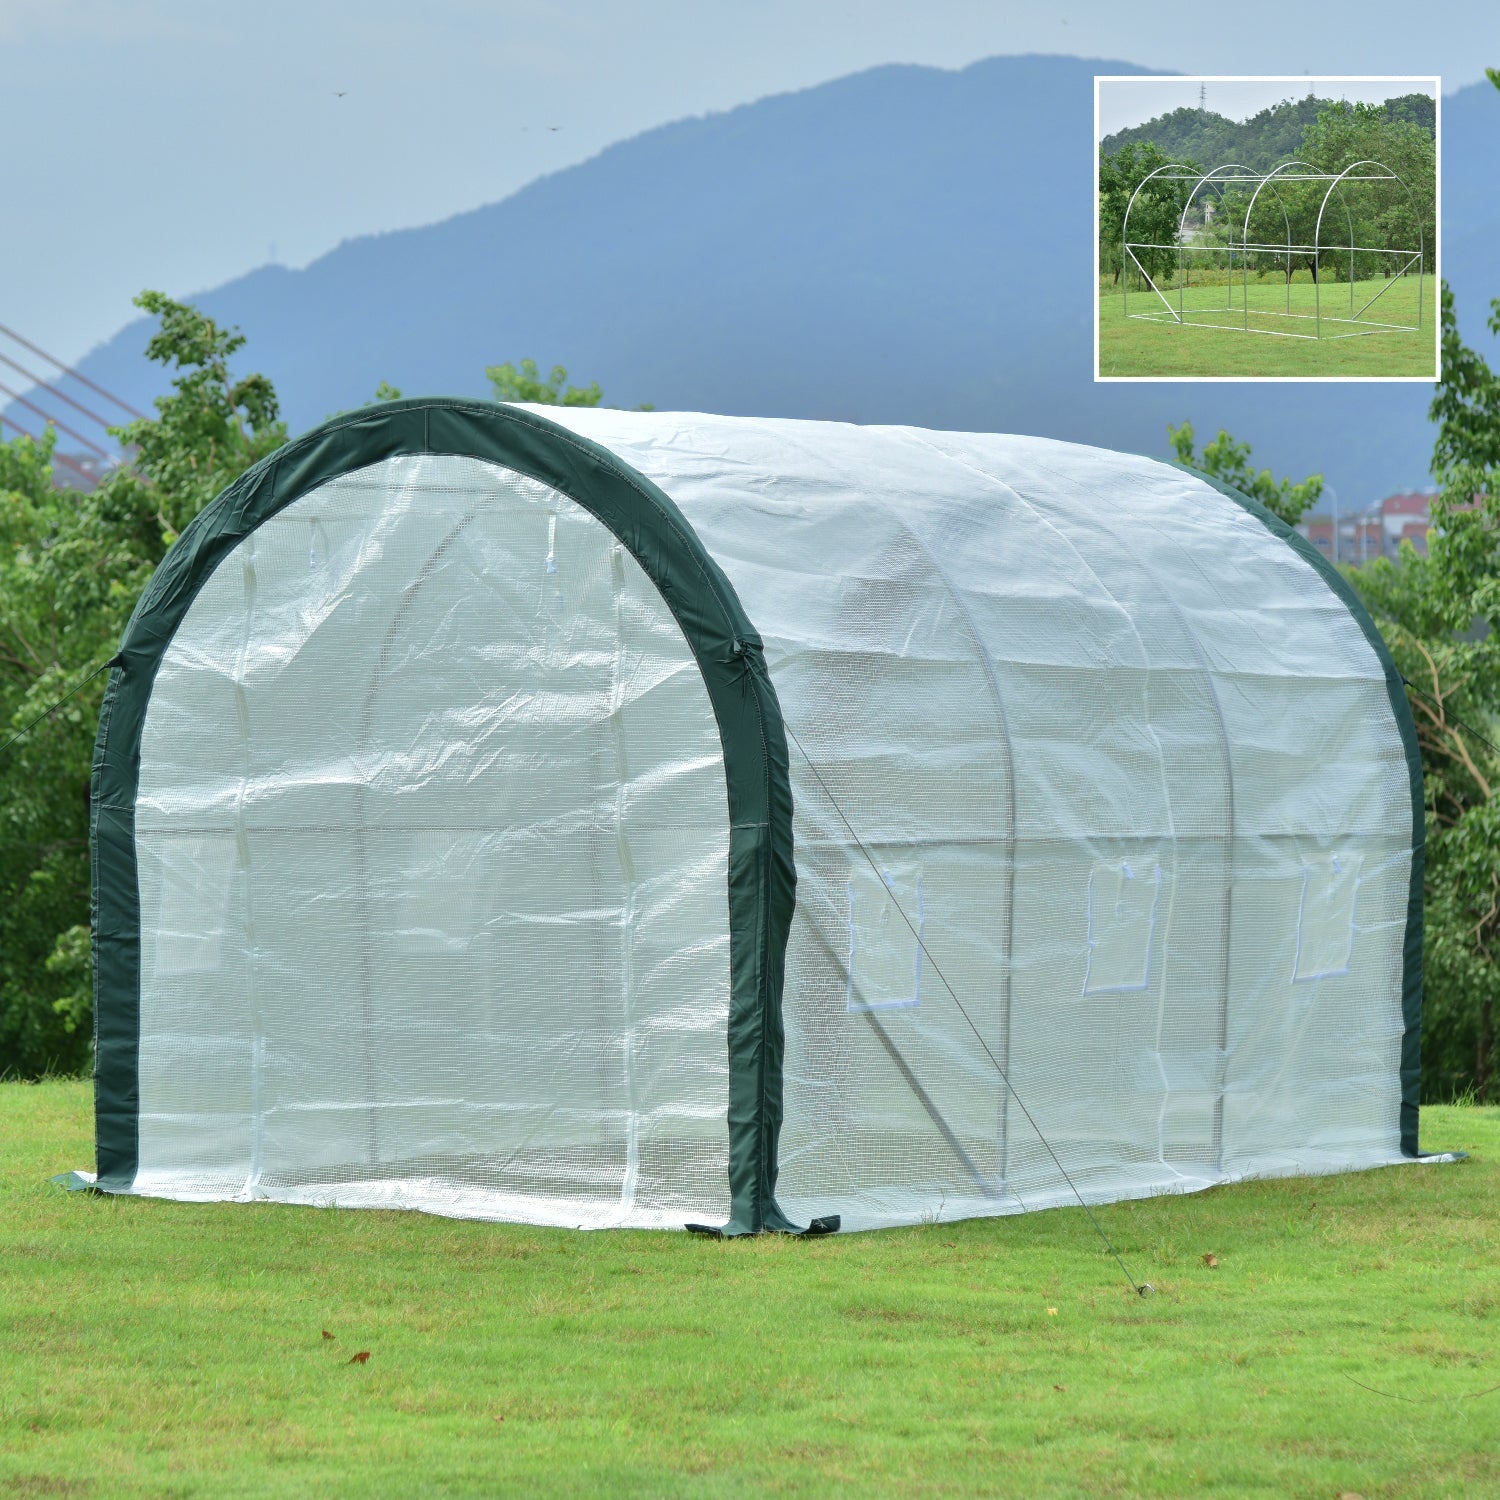 12 ft. x 7 ft. x 7 ft. Walk-in Tunnel Greenhouse with Zipper Door, Side Windows Greenhouse Aoodor   